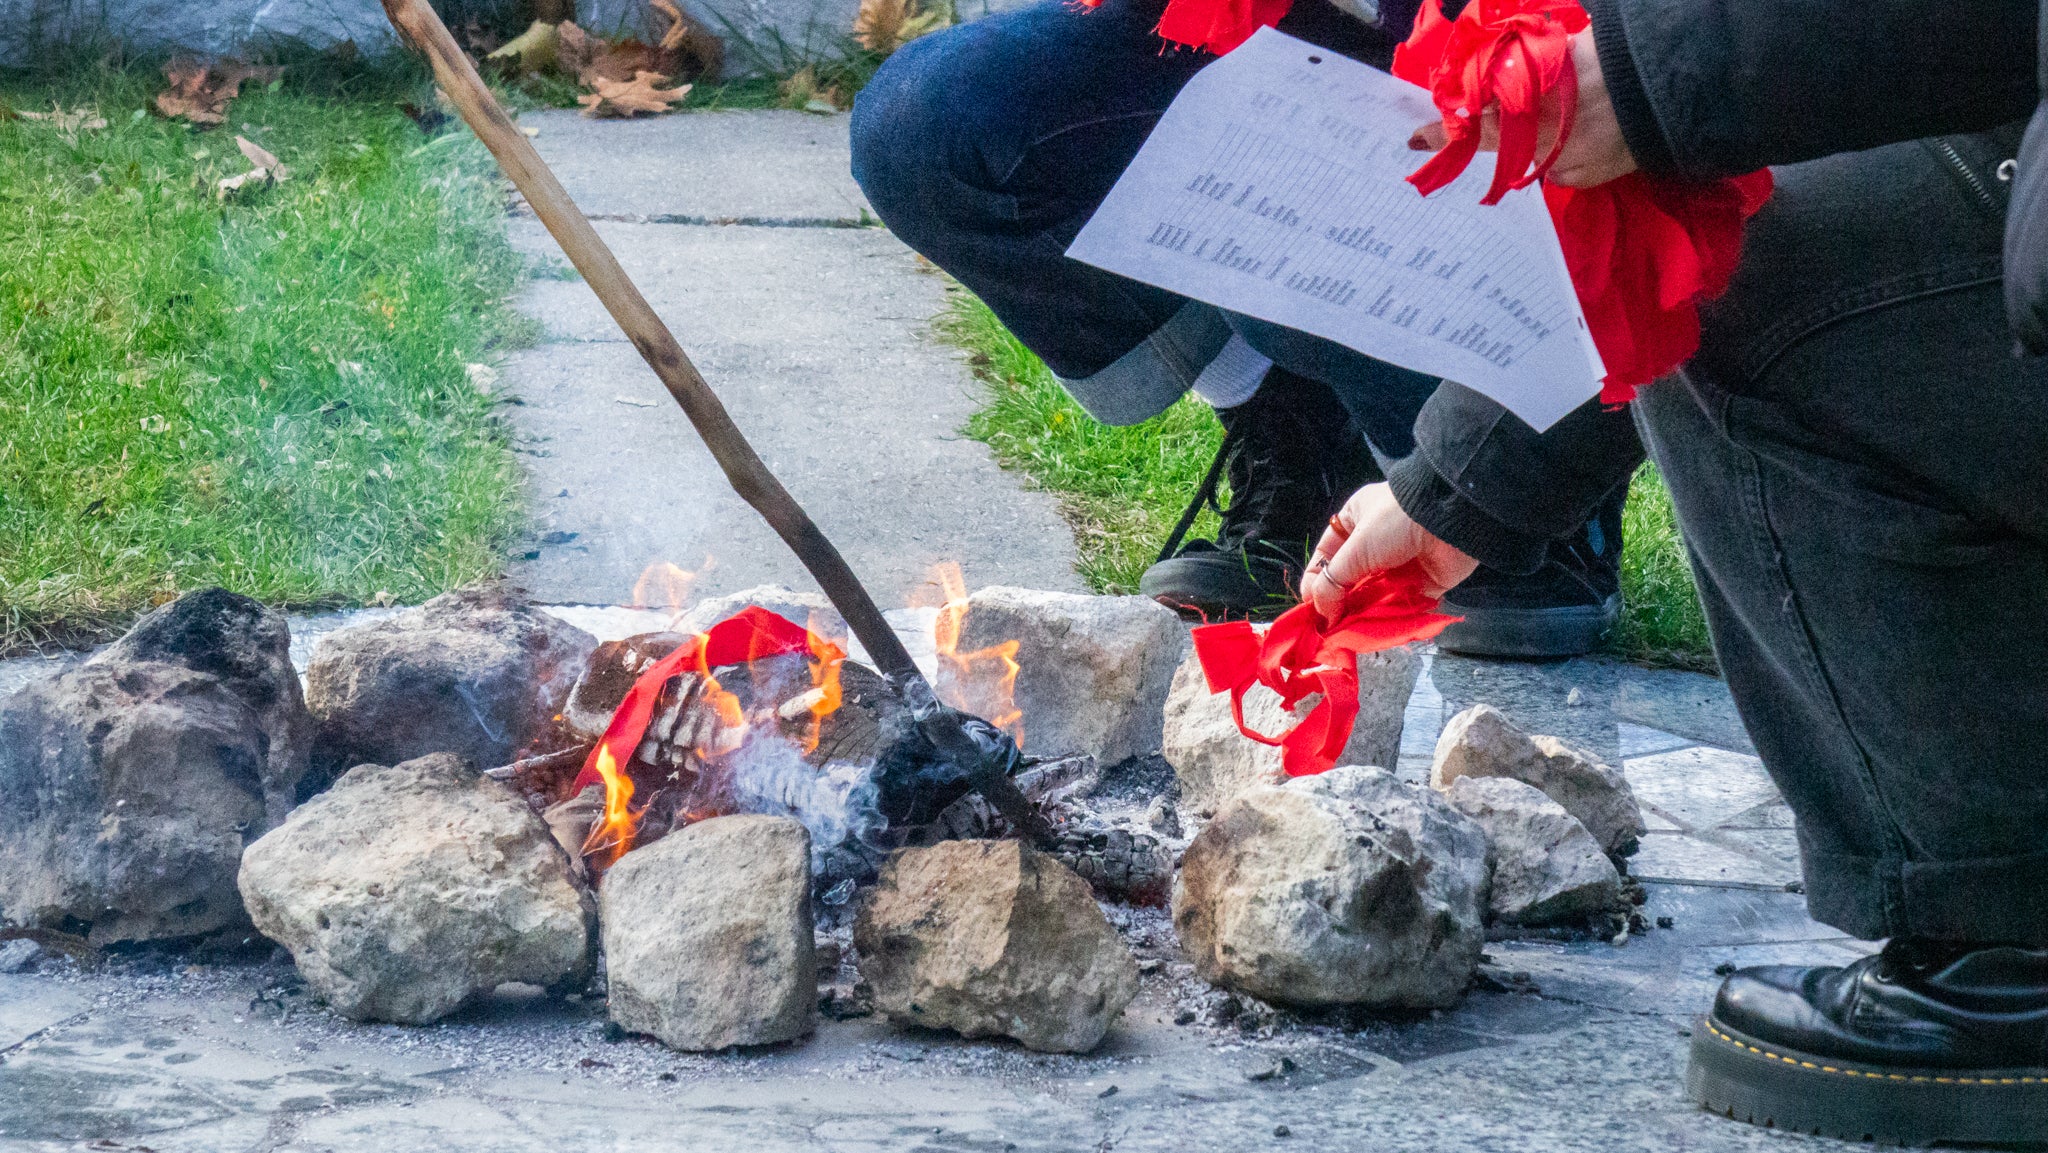 Participant carefully placing red fabric ties into s fire along with a list of names